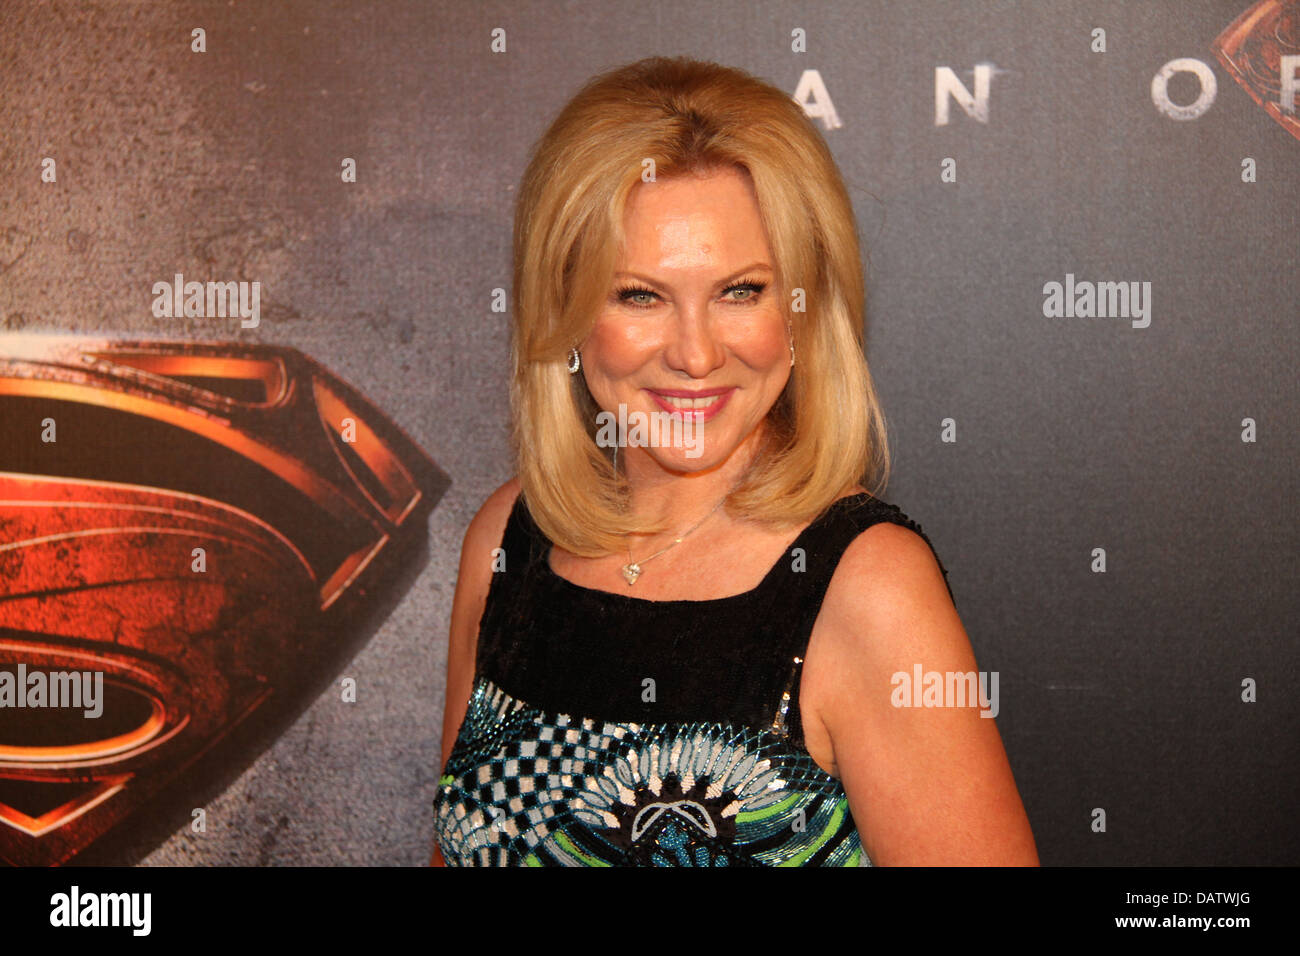 Australian Television Personality Kerri-Anne Kennerley arrives on the red carpet for the Australian premiere of Man of Steel. Stock Photo